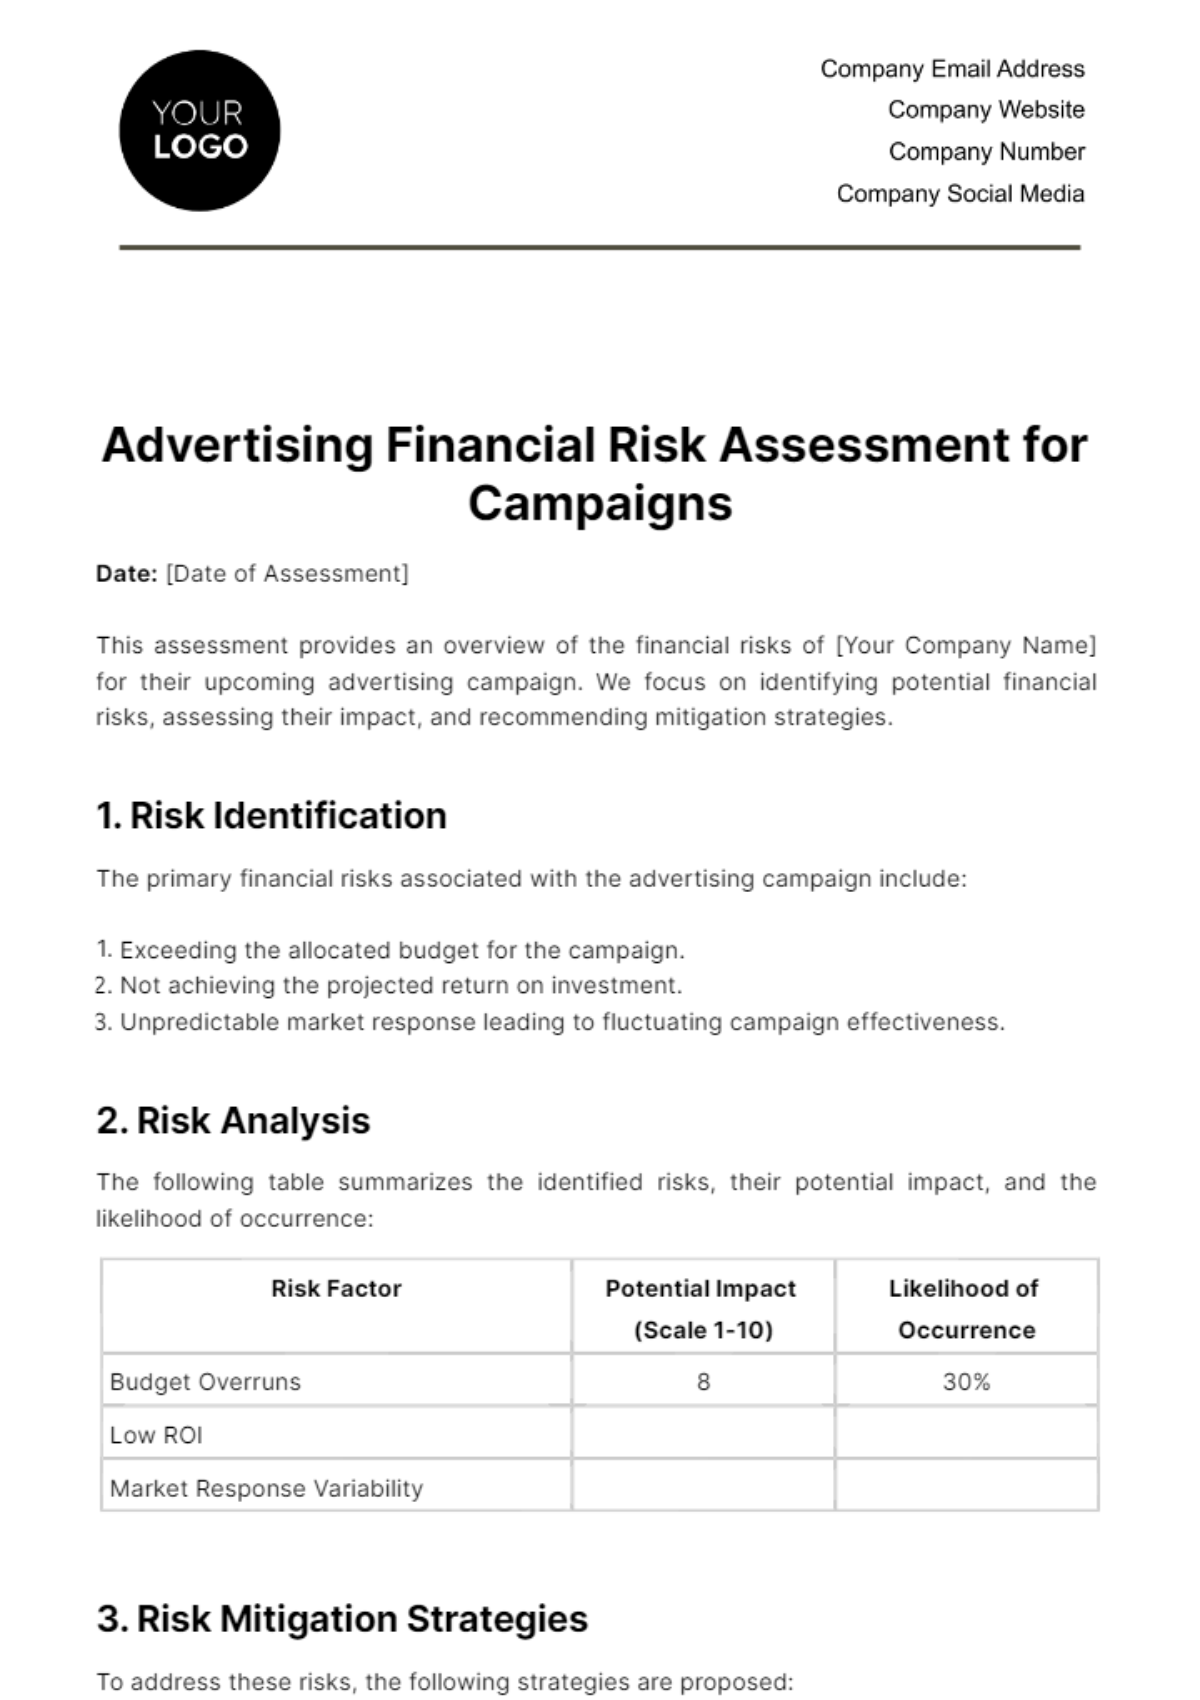 Advertising Financial Risk Assessment for Campaigns Template